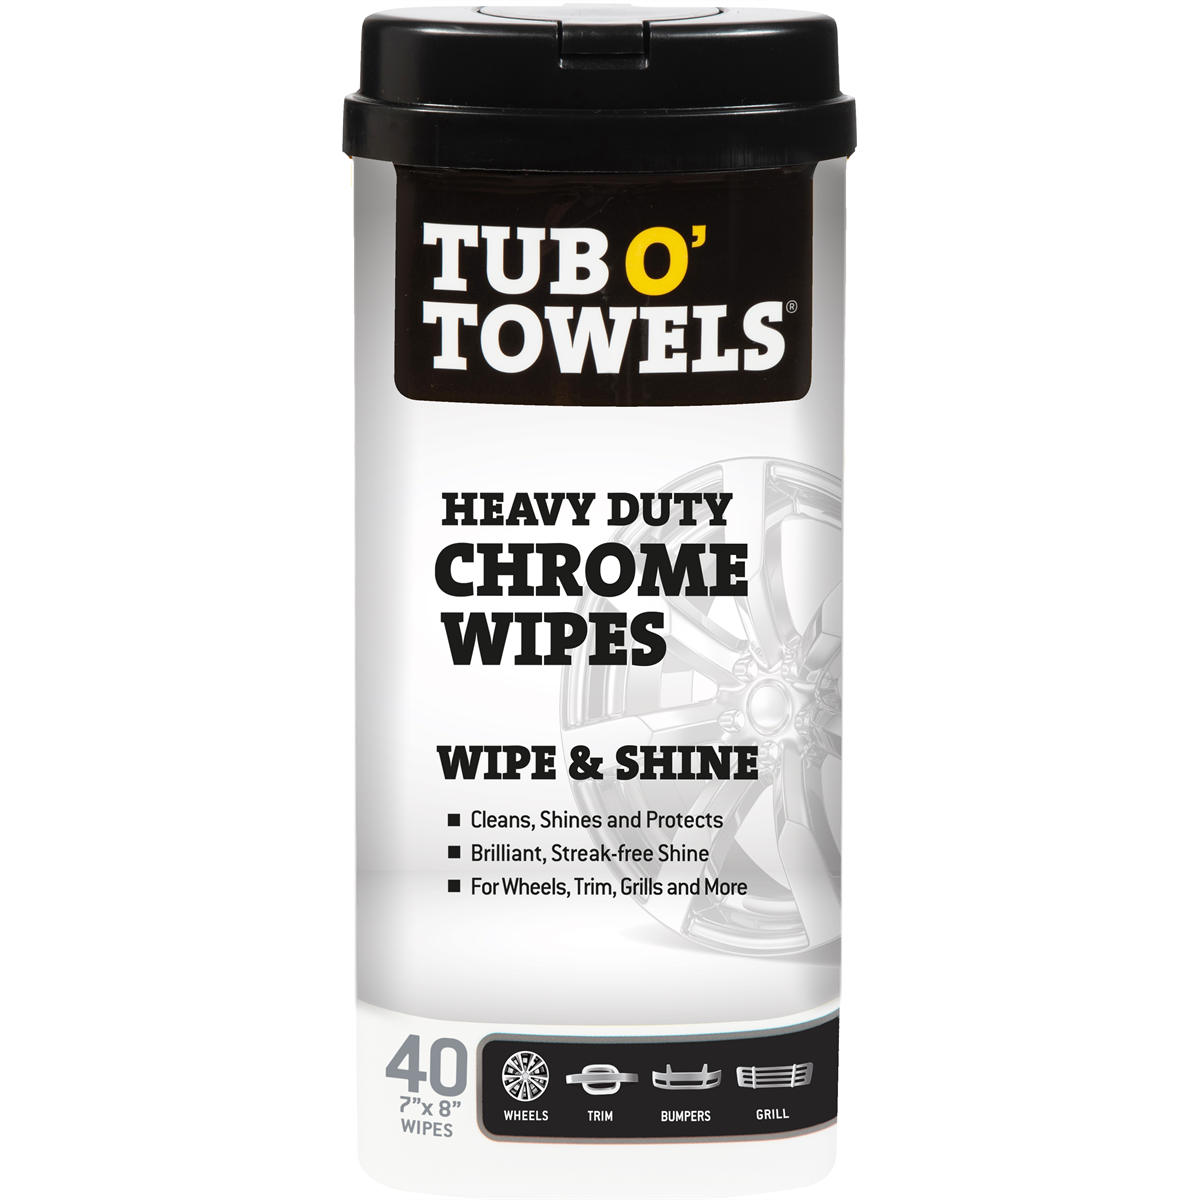 Tub O' Towels TW40-CHR Heavy Duty Chrome Wipes, 40 Count (tw40chr) - Picture 1 of 1